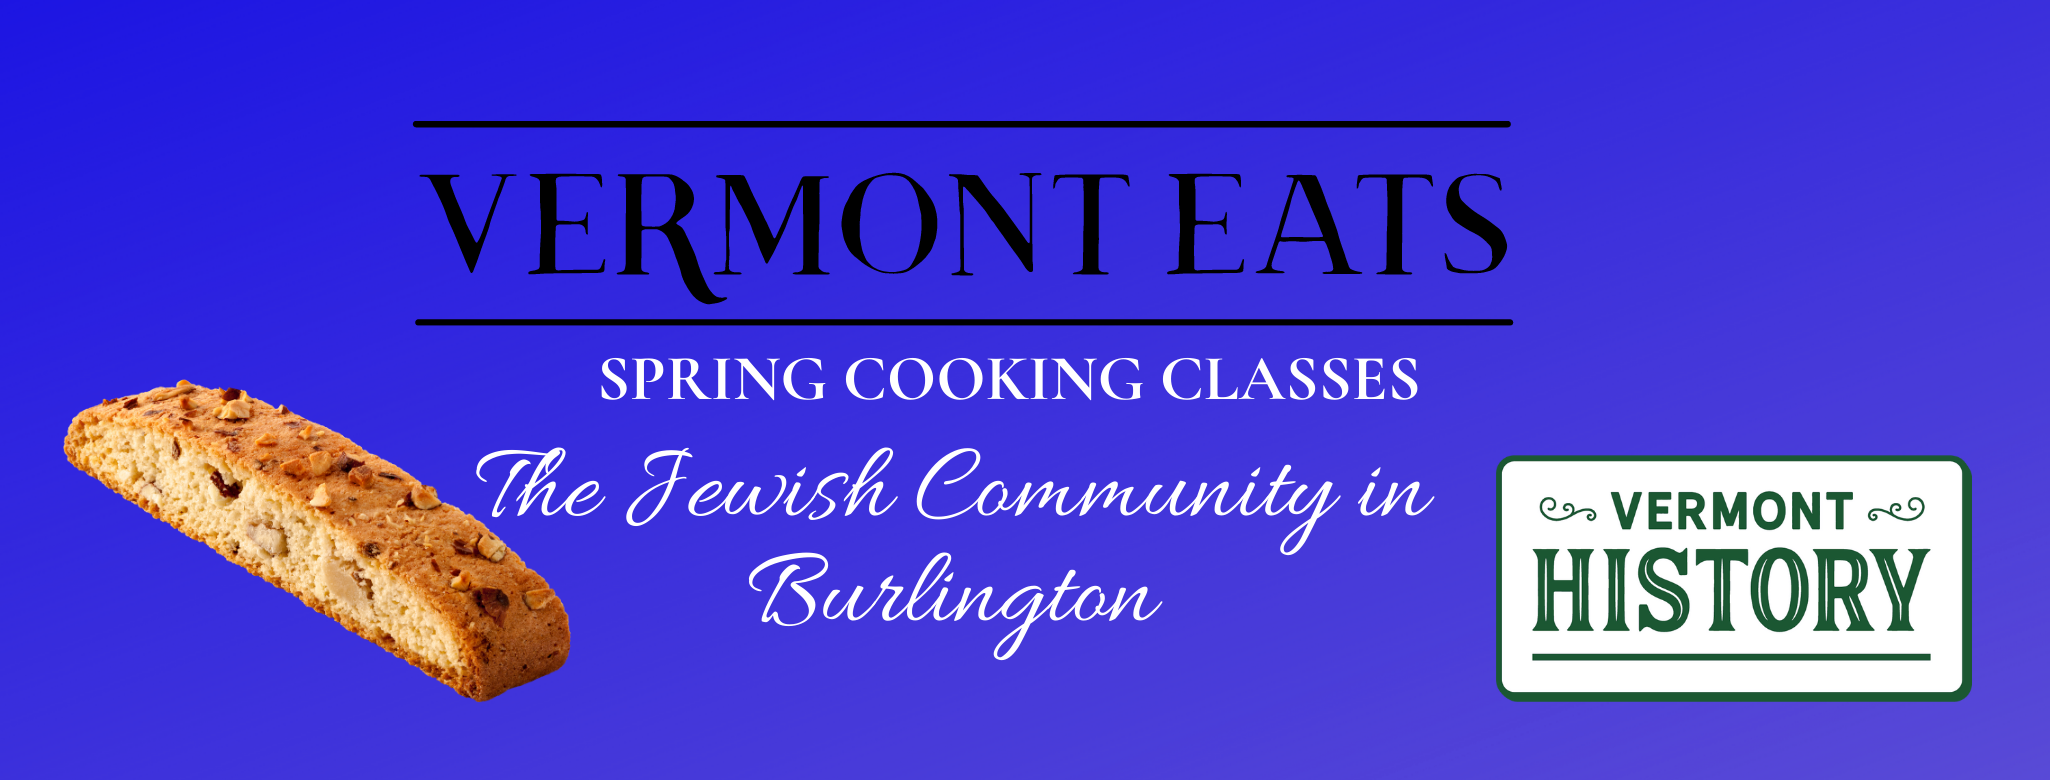 Vermont Eats Spring Cooking Classes. The Jewish American Community in Burlington.